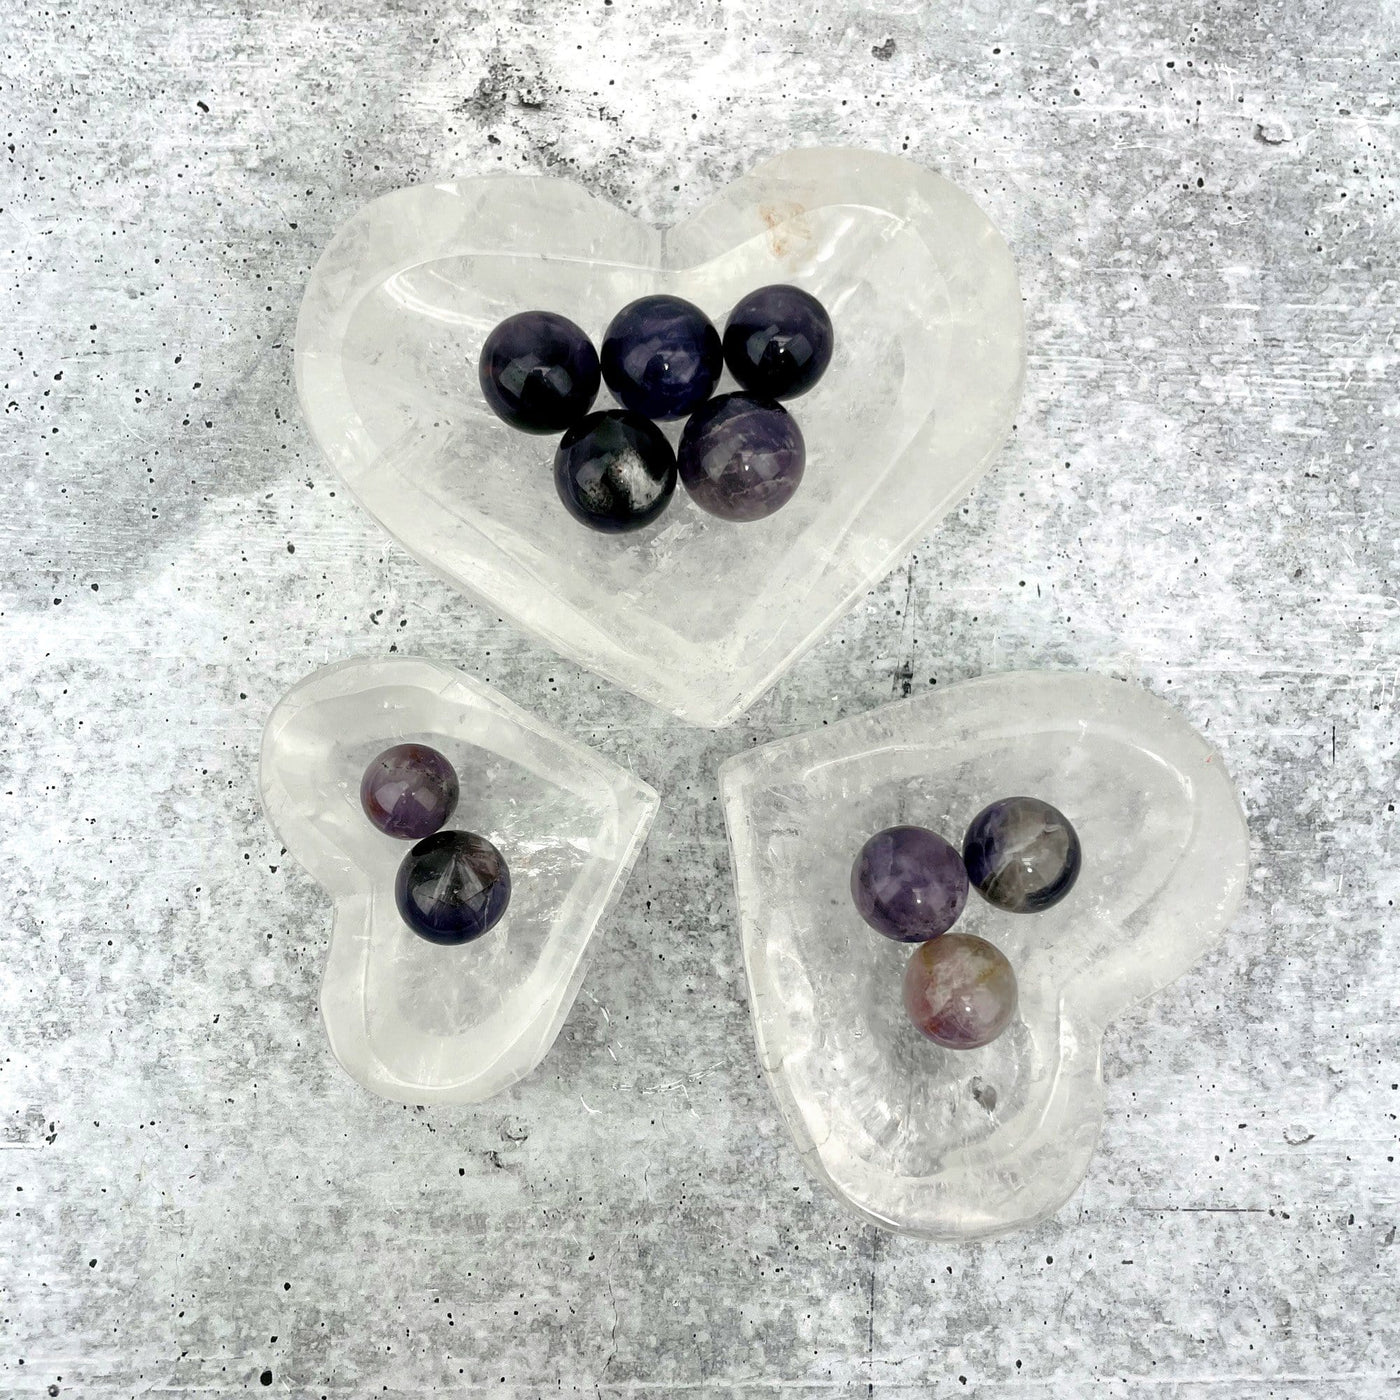 3 sizes of the crystal quartz heart bowls with spheres 